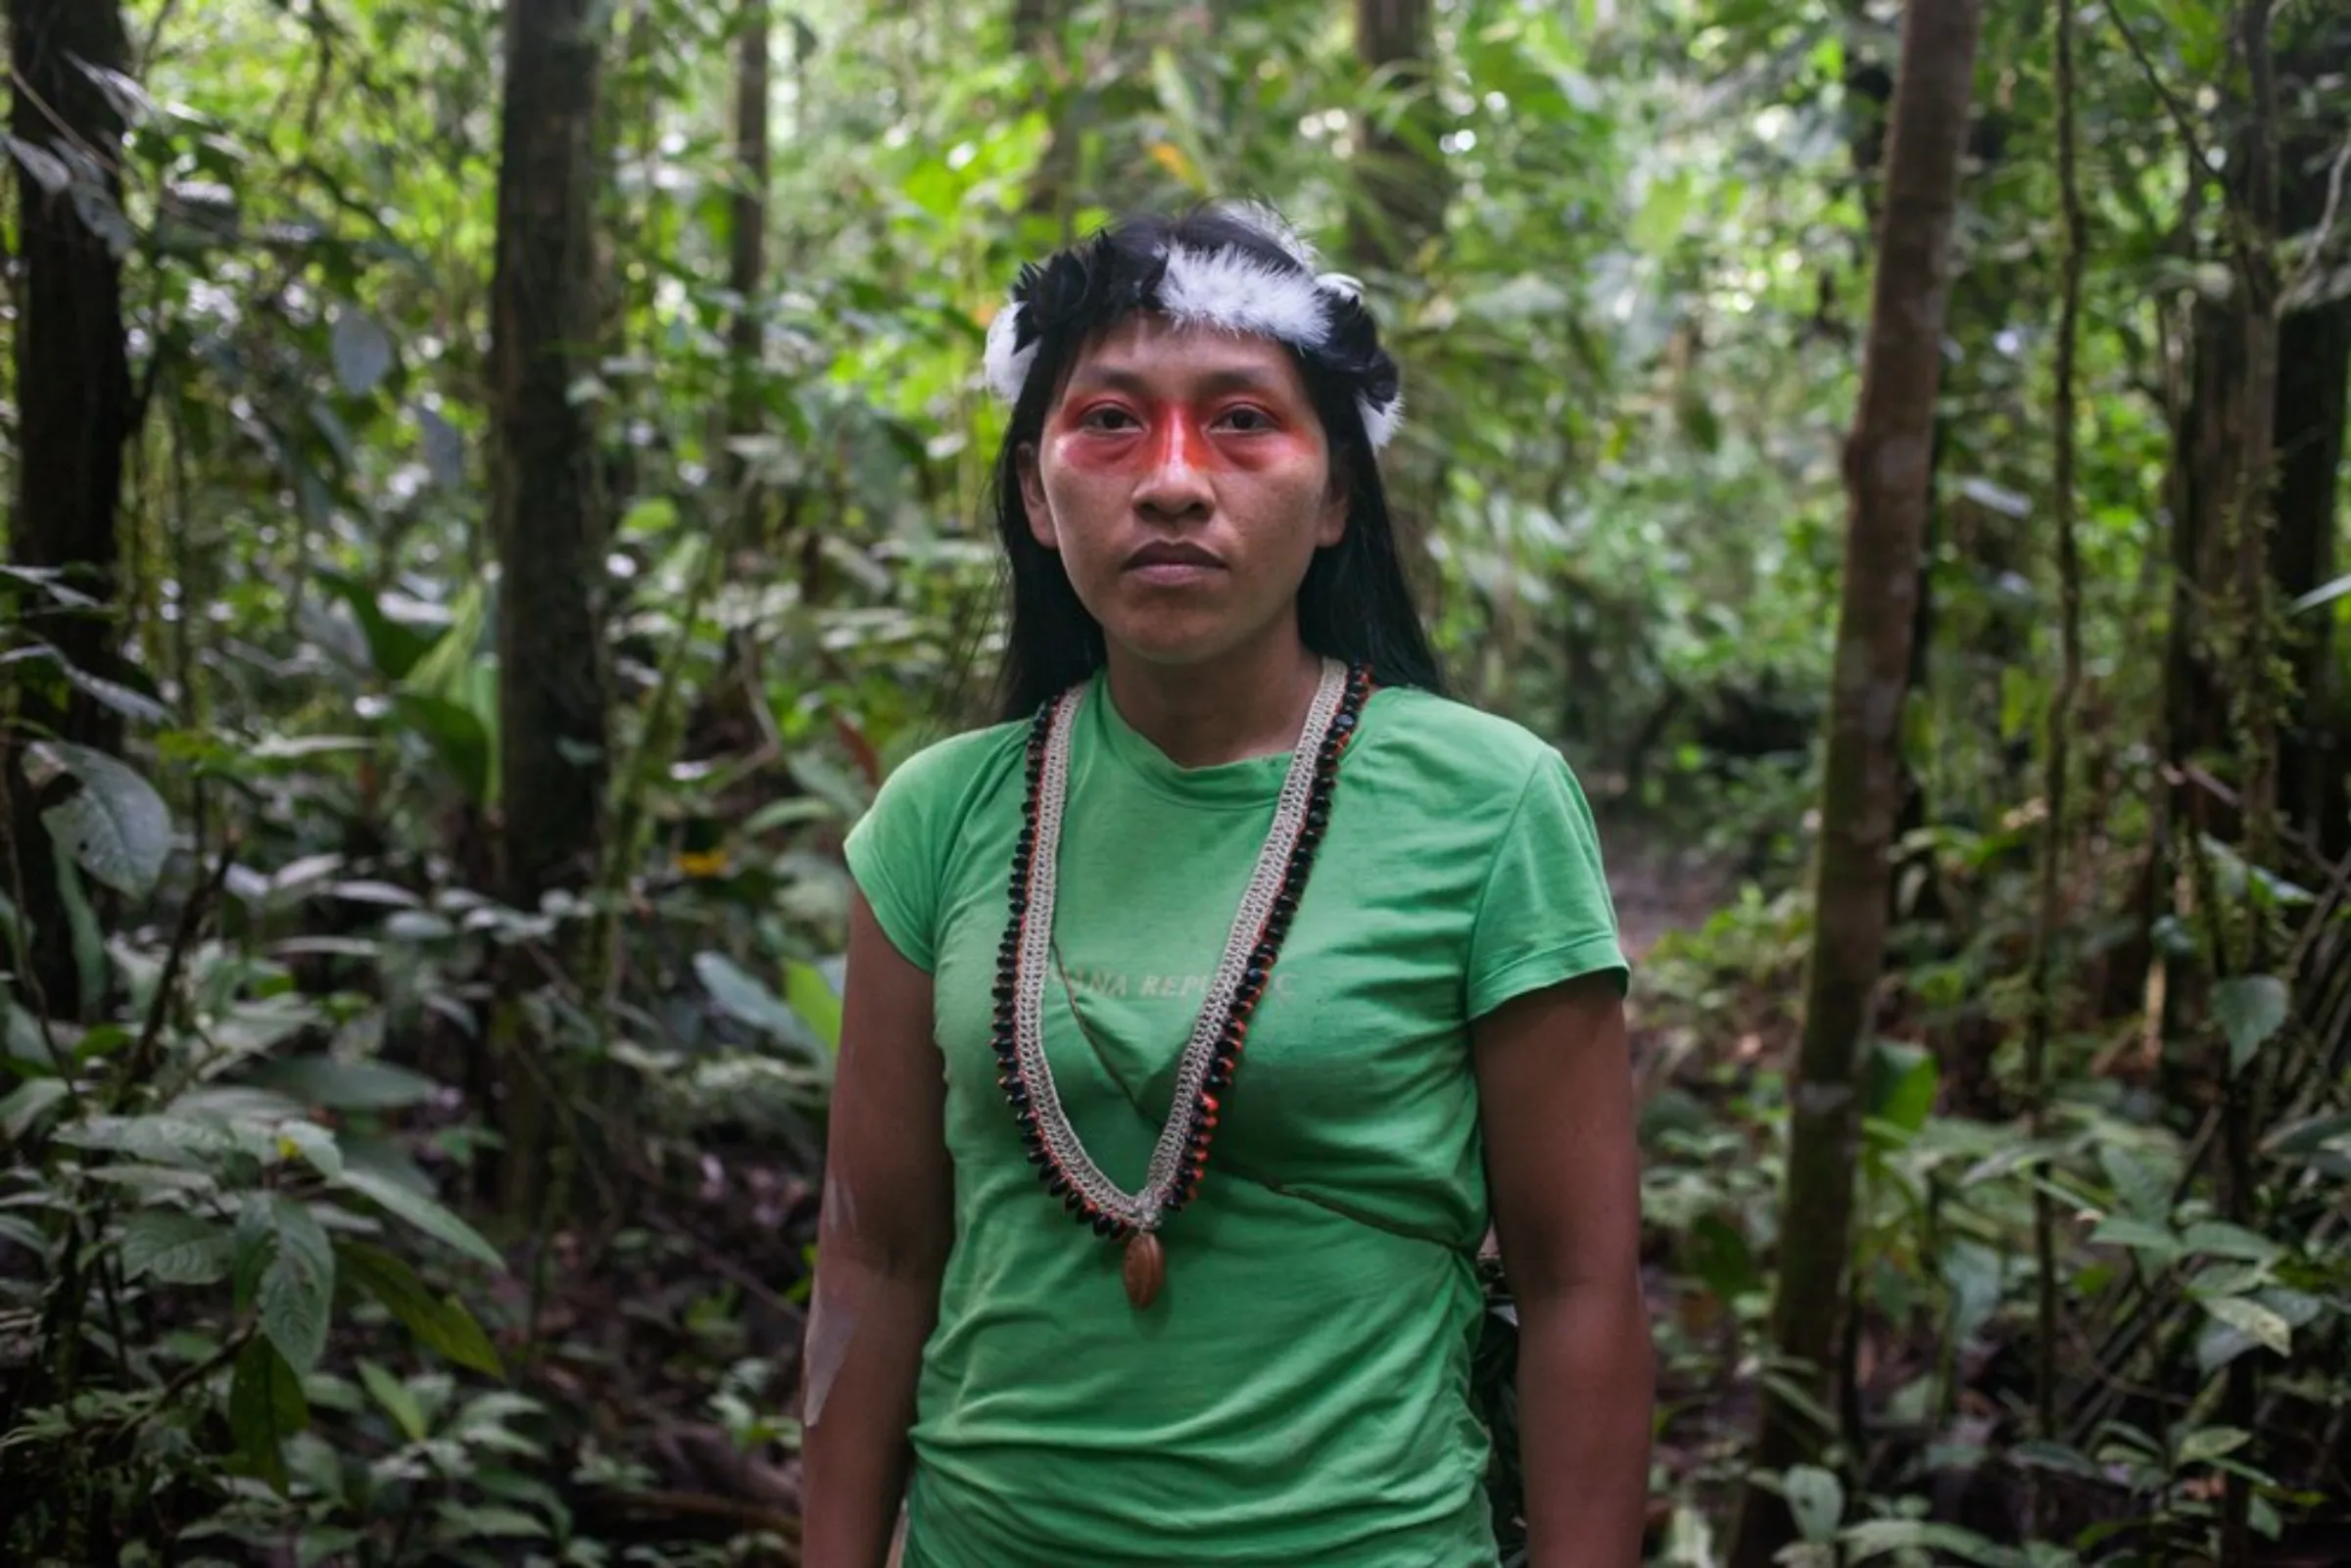 Silvana Nihua, president of the Waorani Organization of Pastaza (OWAP) and leader of 30 communities of about 1,000 Pastaza Waorani people living in riverside villages, stands in pristine Amazon rainforest in the province of Pastaza, Ecuador, on April 26, 2022